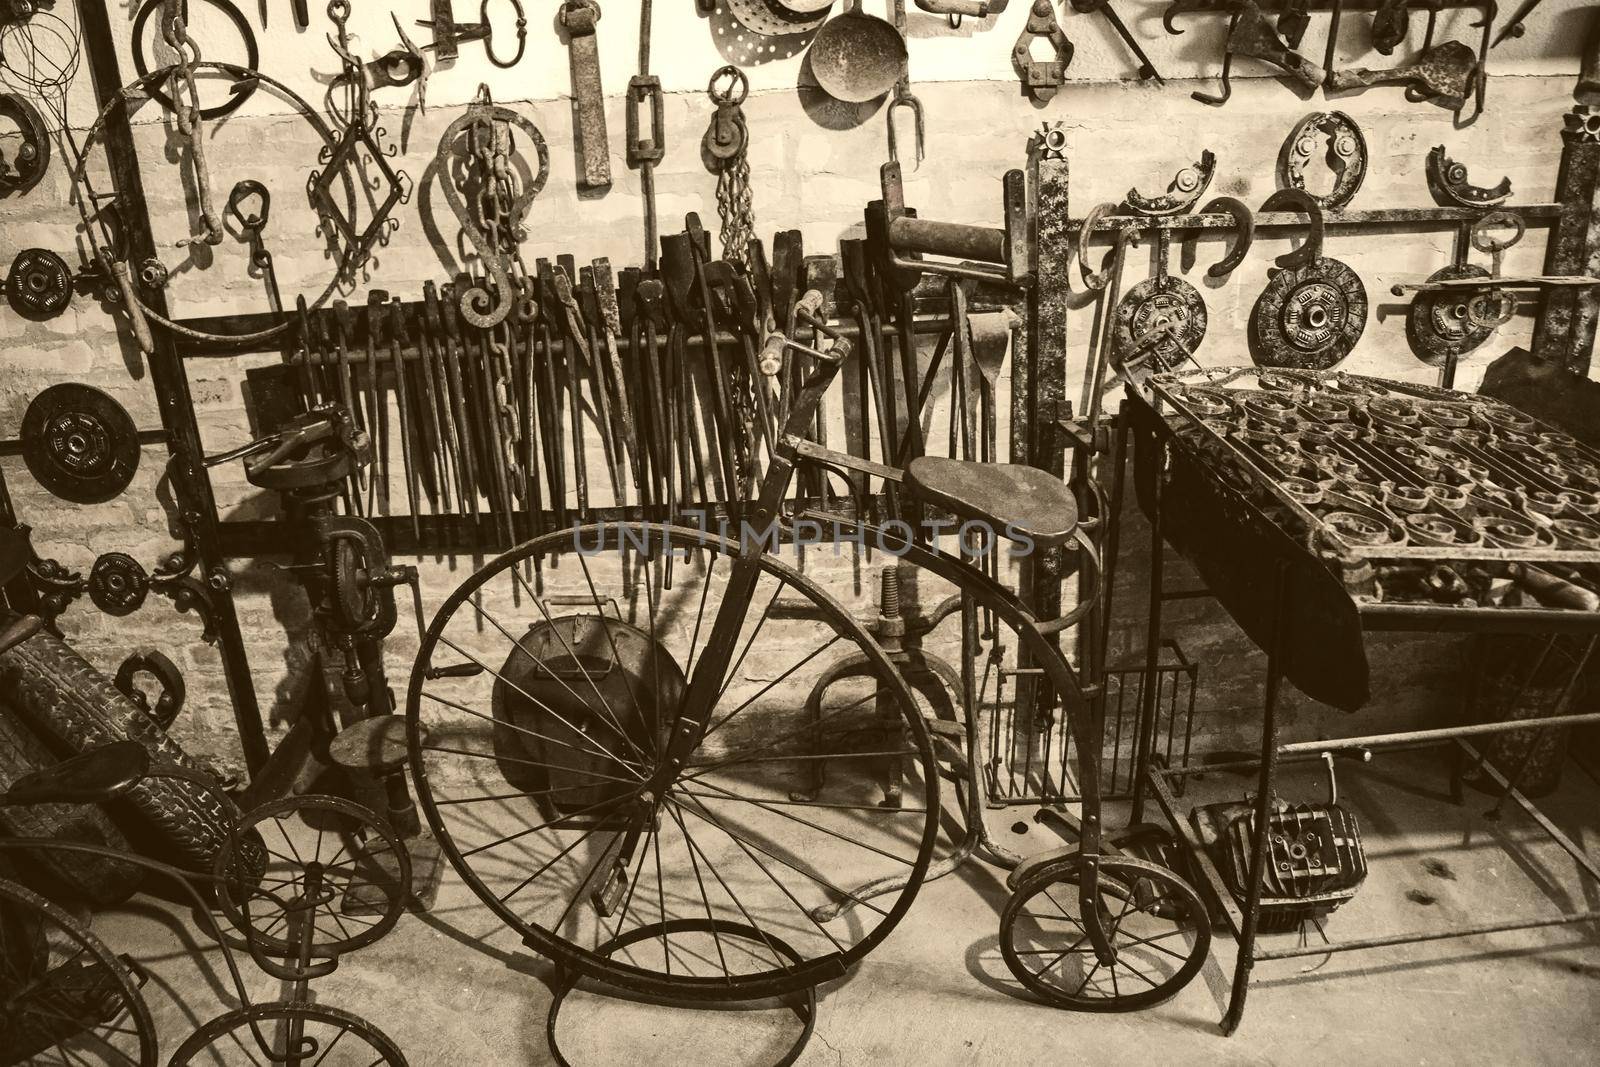 old bicycle and iron tools hanging on the wall - hardware workshop